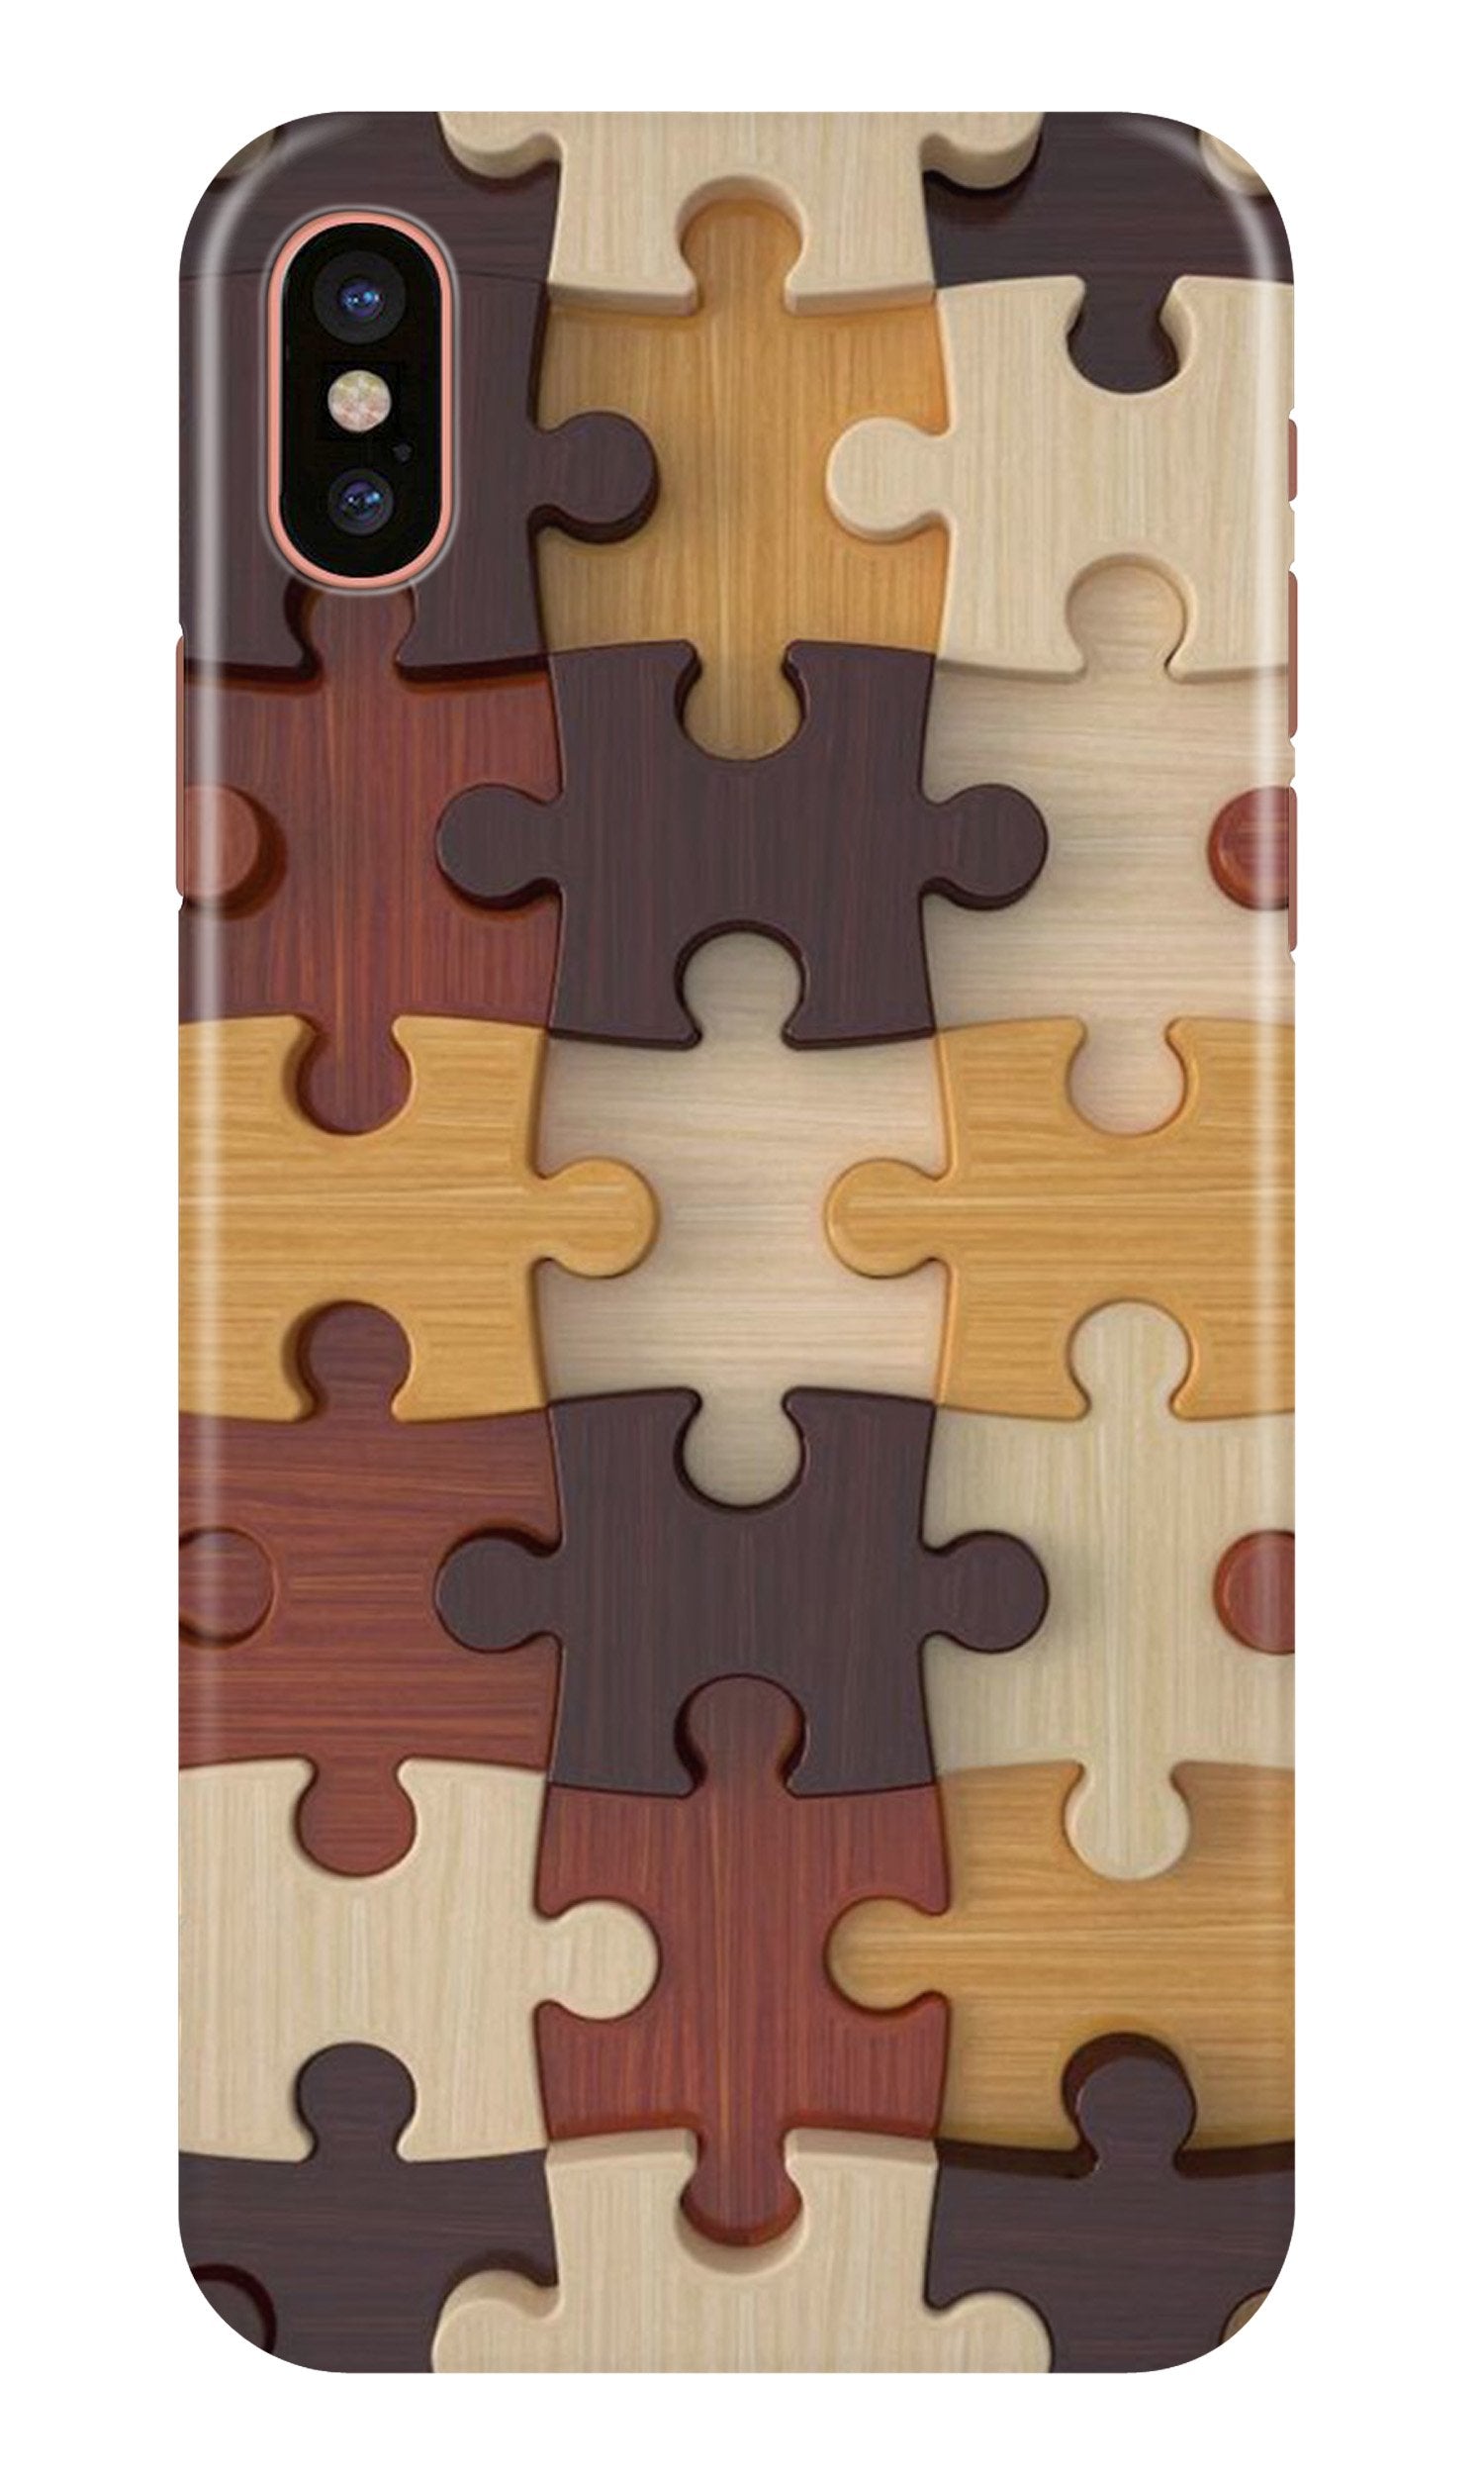 Puzzle Pattern Case for iPhone X (Design No. 217)